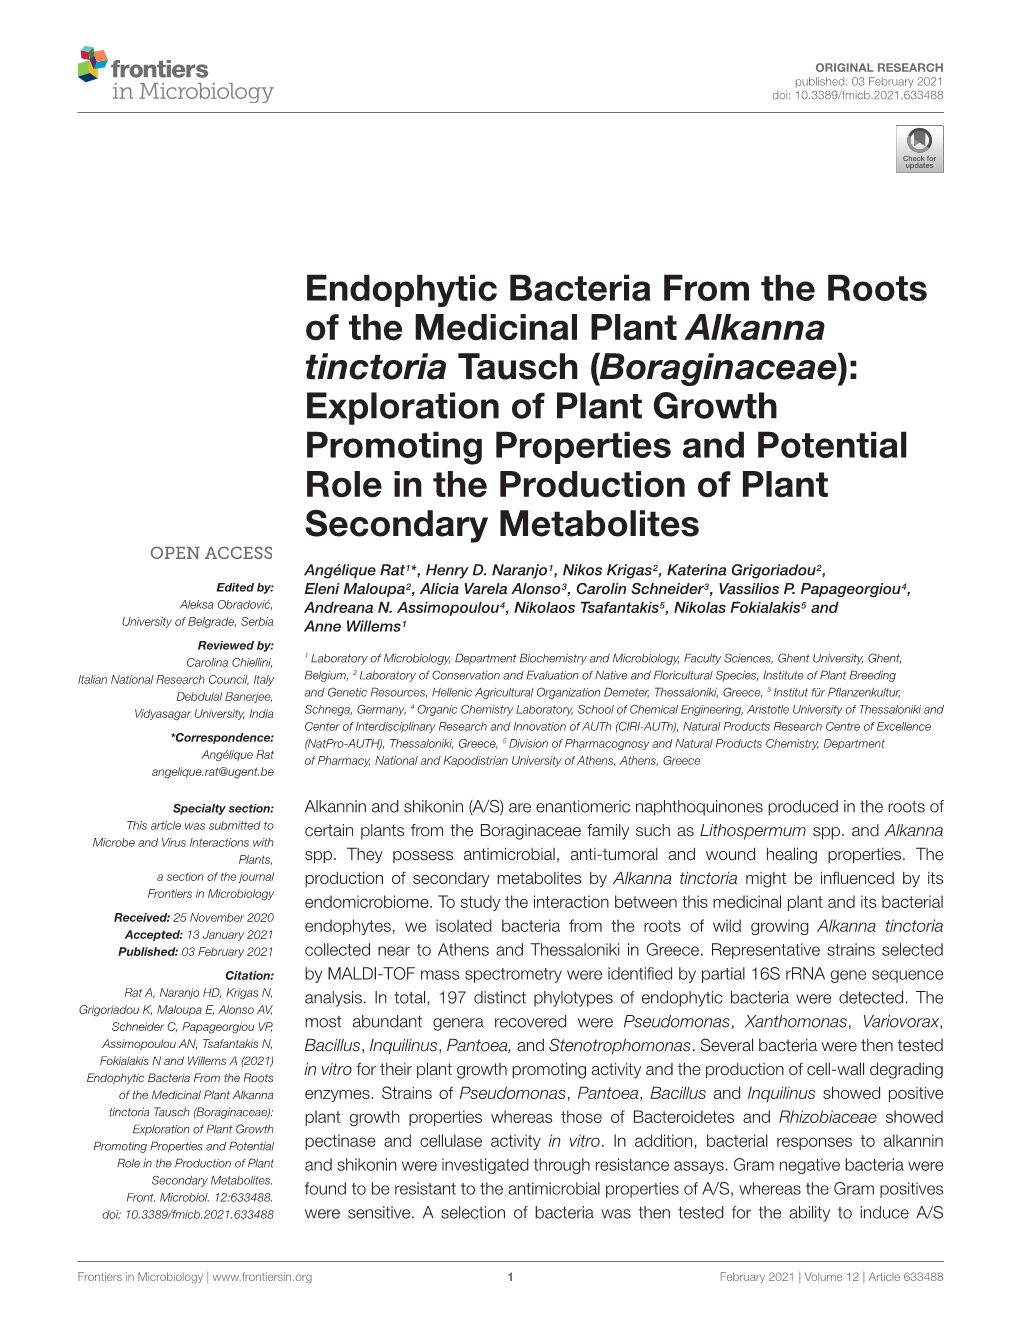 Endophytic Bacteria from the Roots of the Medicinal Plant Alkanna